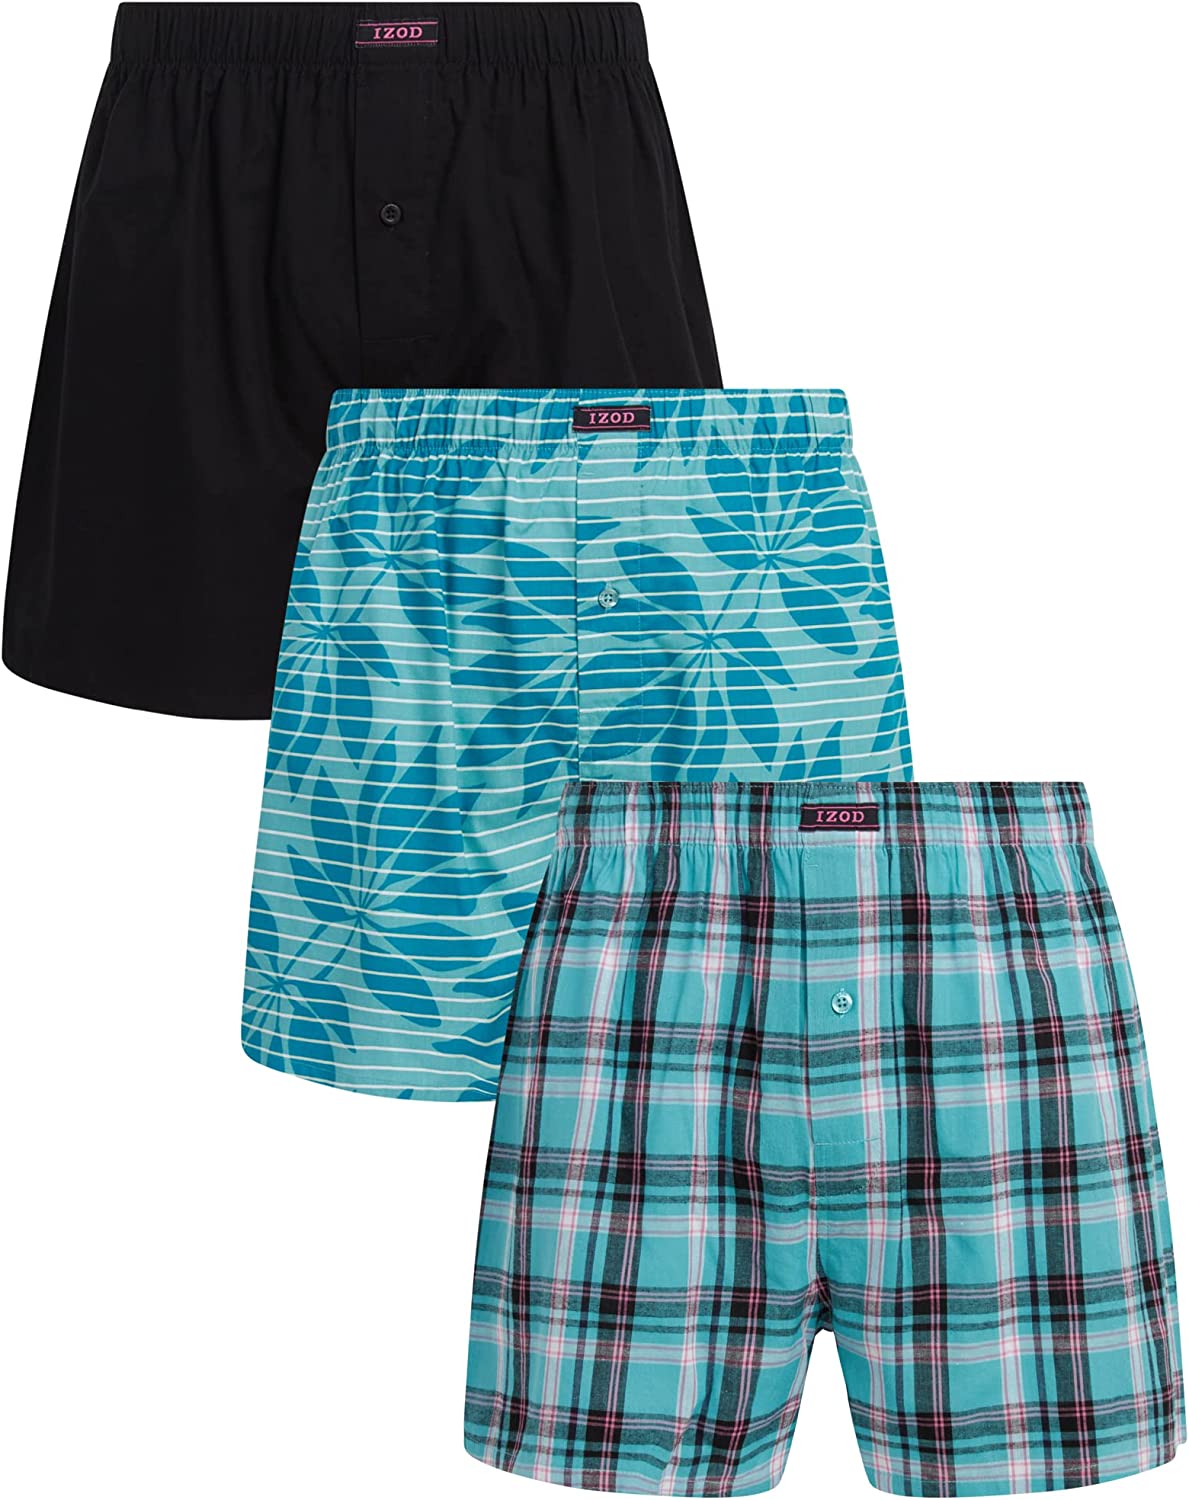 IZOD Men?s Underwear ? Cotton Woven Boxers with Functional Fly